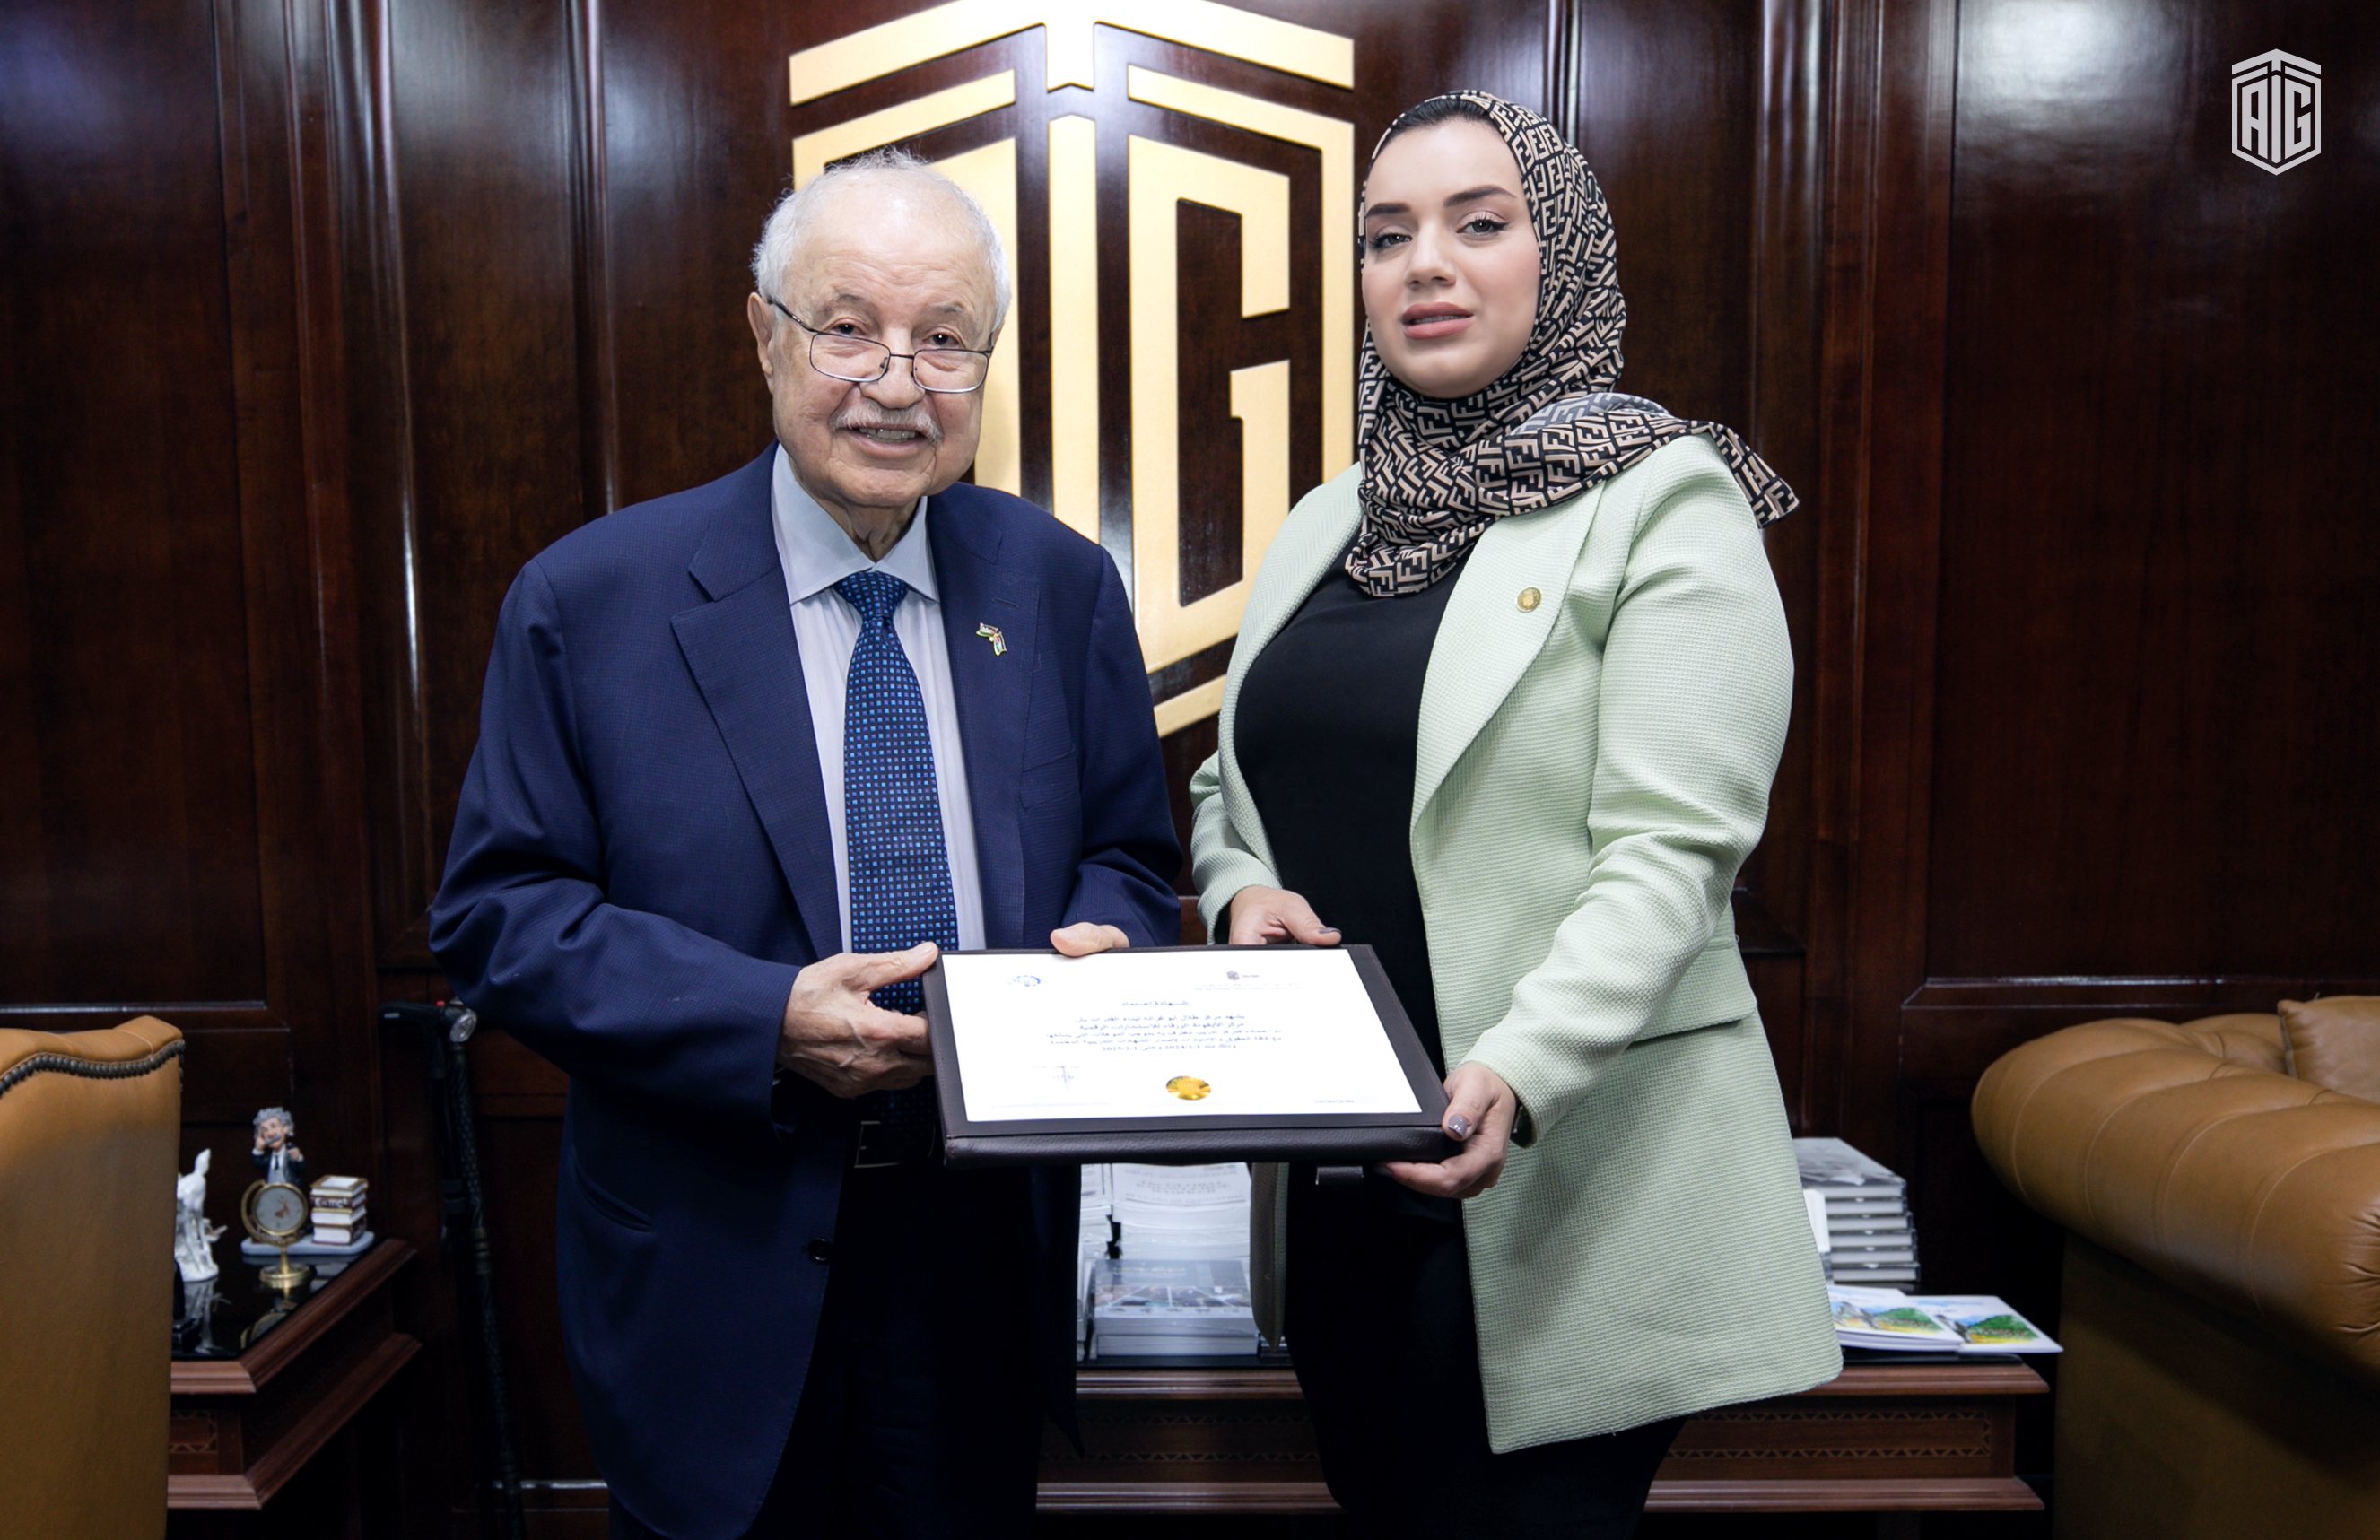 Dr. Abu-Ghazaleh Presents Accreditation Certificates to ‘Blue Icon’ and ‘Creative Network’ Training Centers